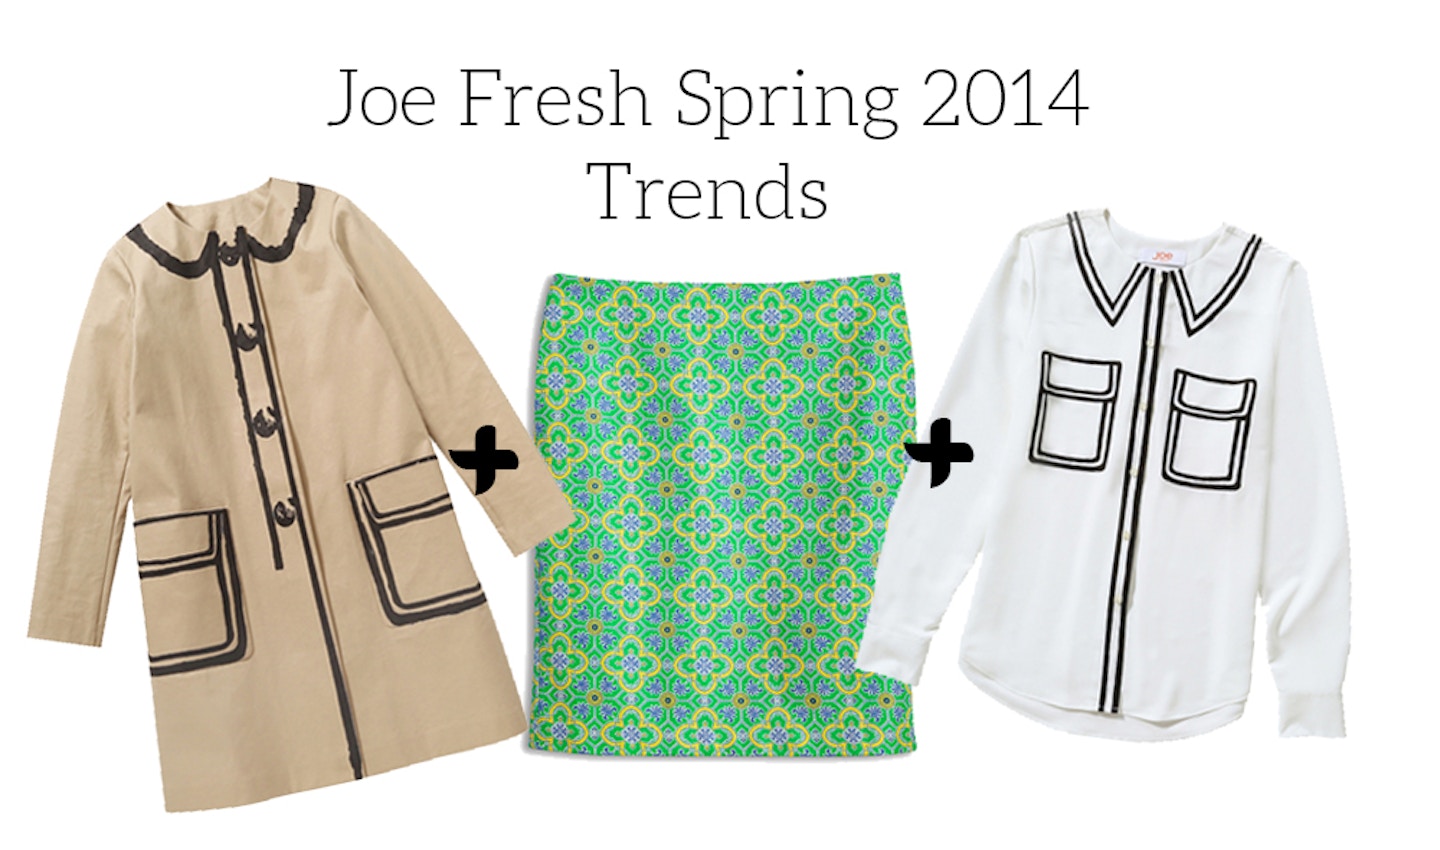 Joe Fresh Spring 2014 Trends + Outfit Ideas